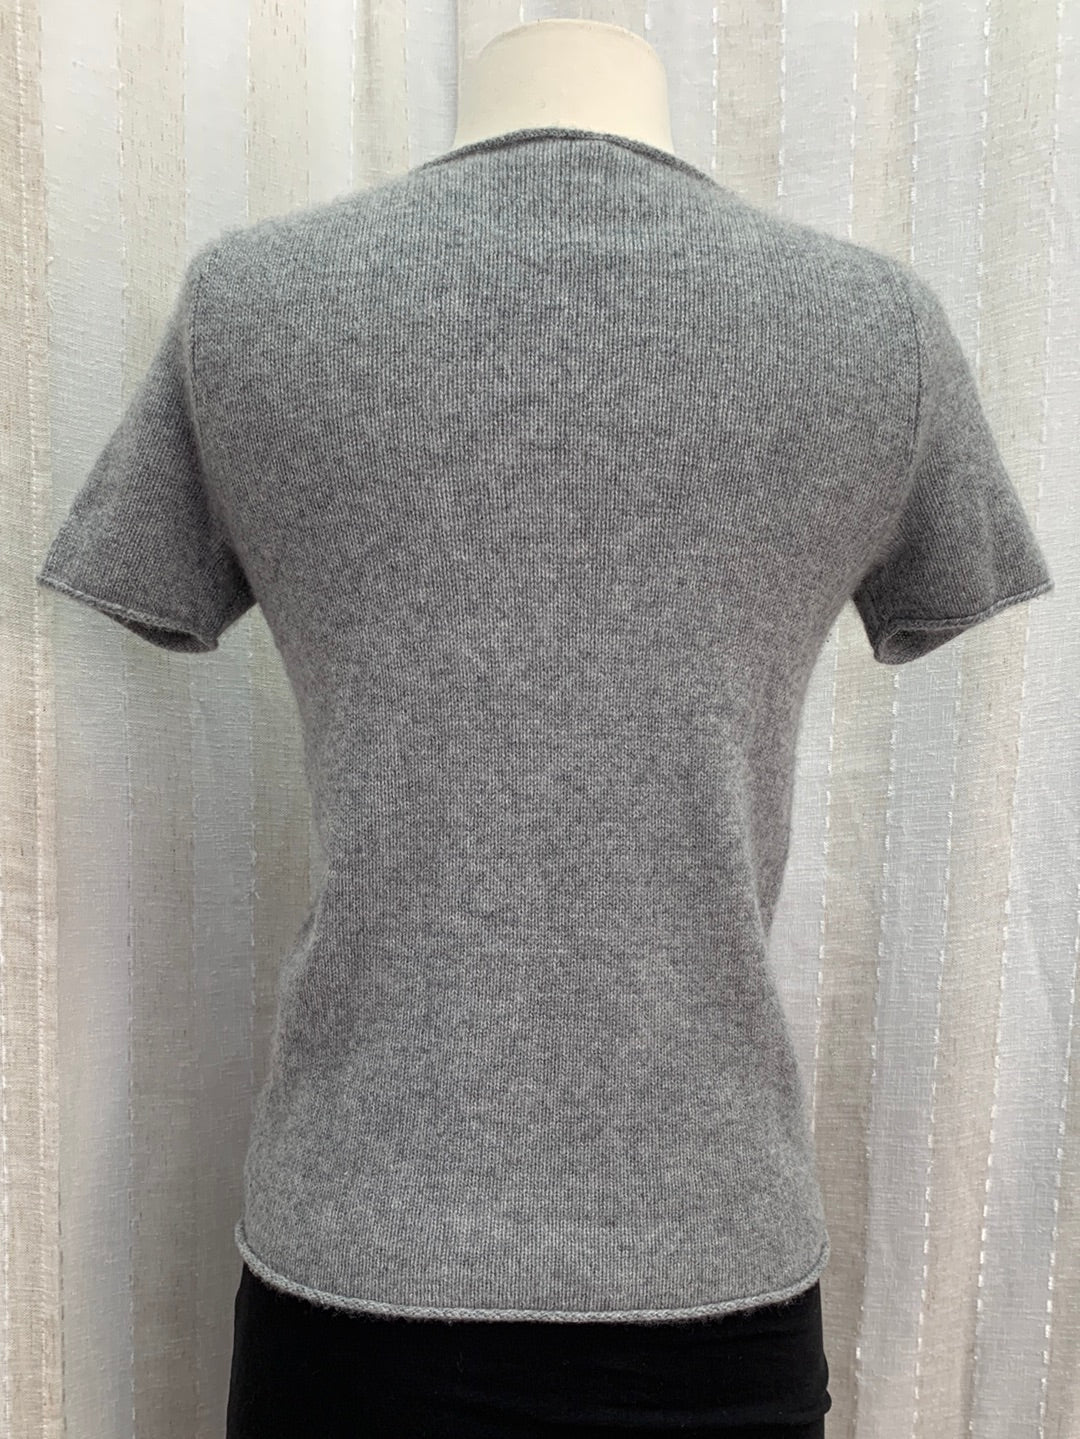 THEORY gray Short Sleeve Tolleree Cashmere Jumper Sweater - S